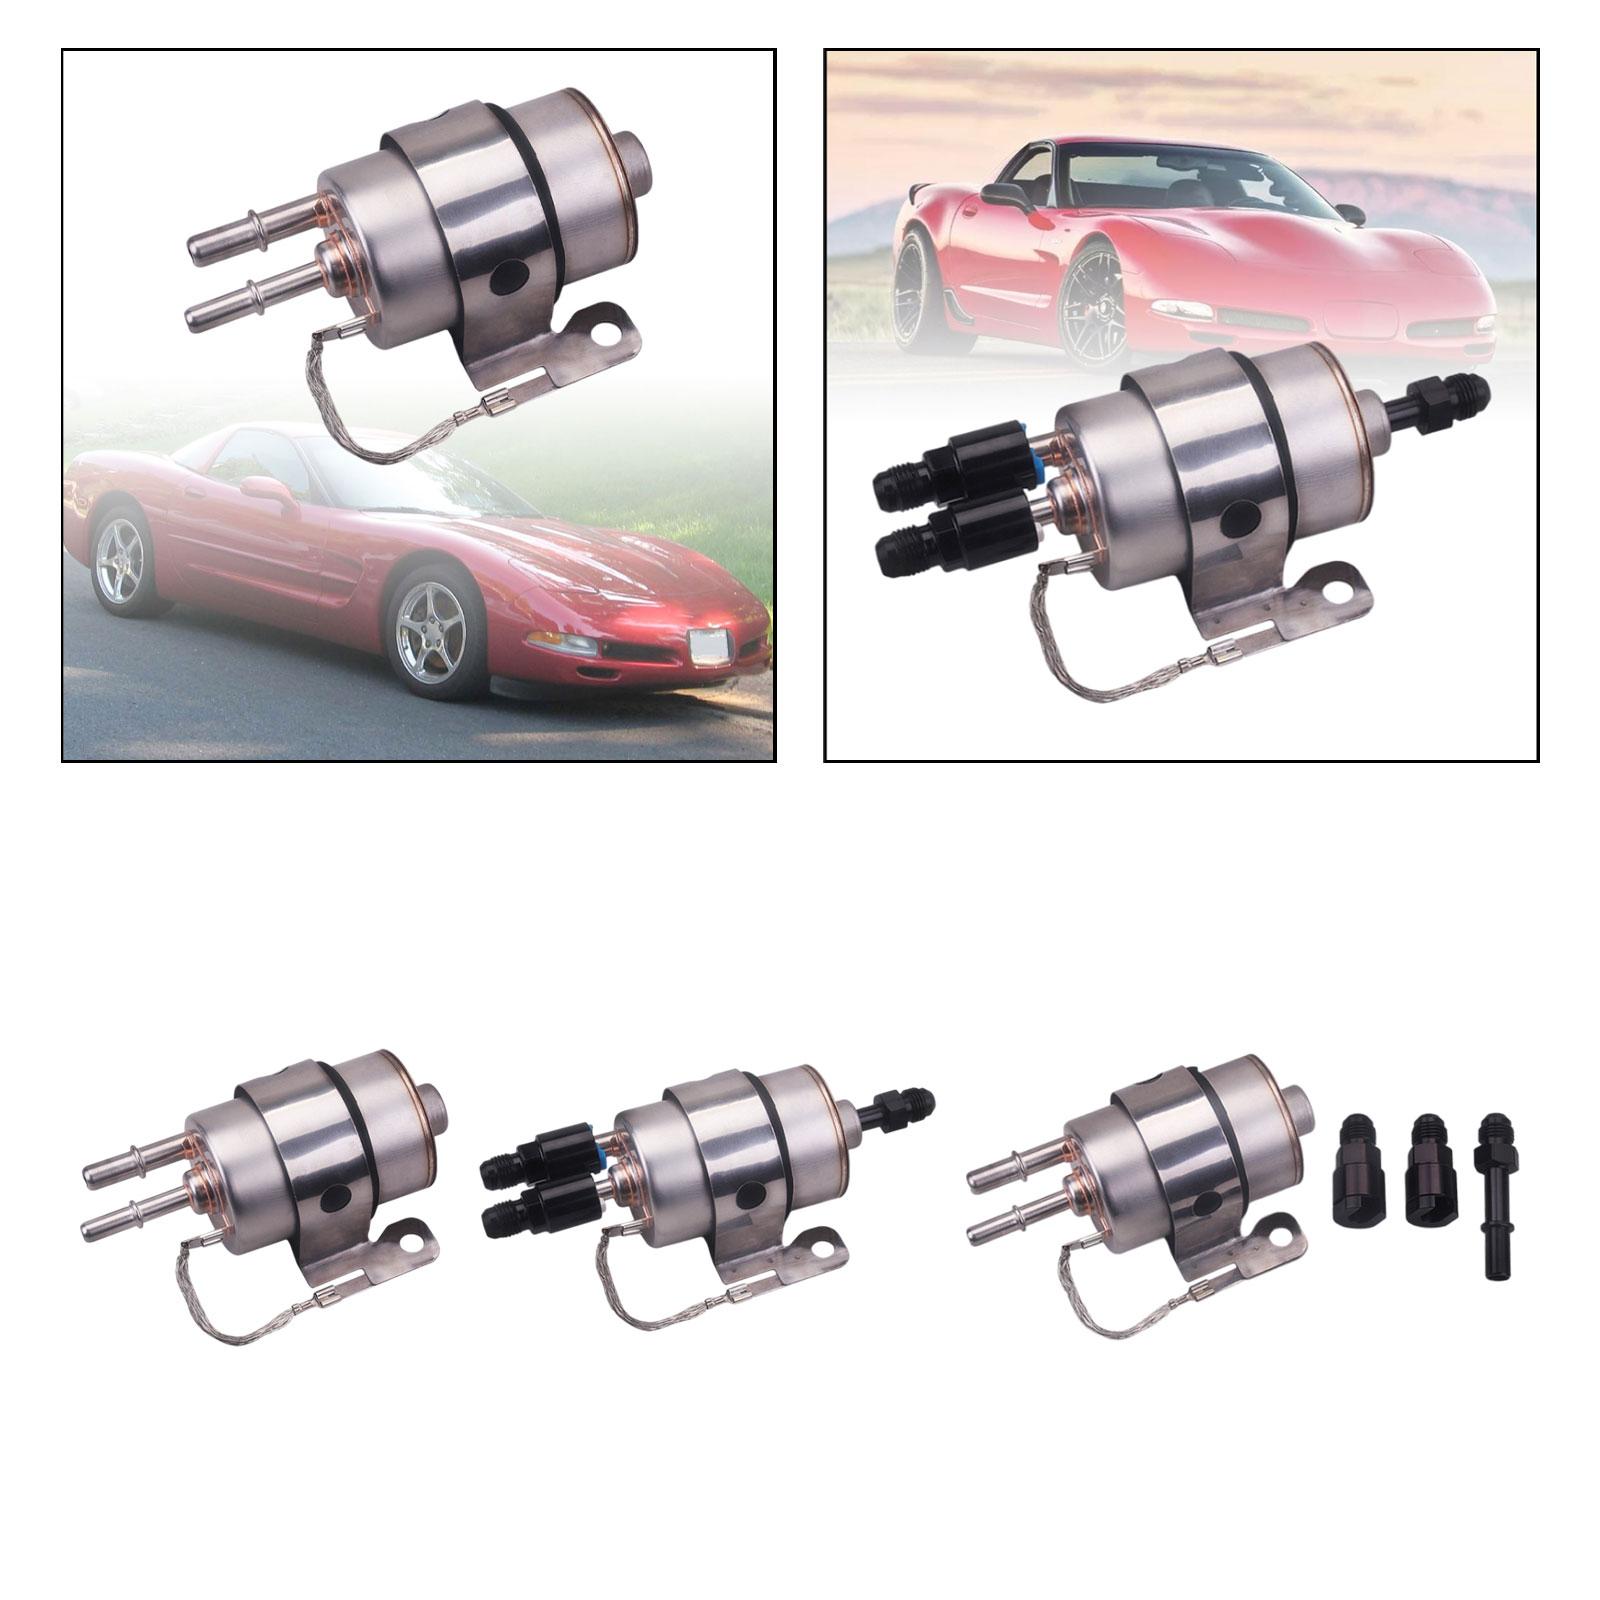 Replacement Fuel Pressure Regulator for Corvette C5 LS Swap Accessories without Fittings 